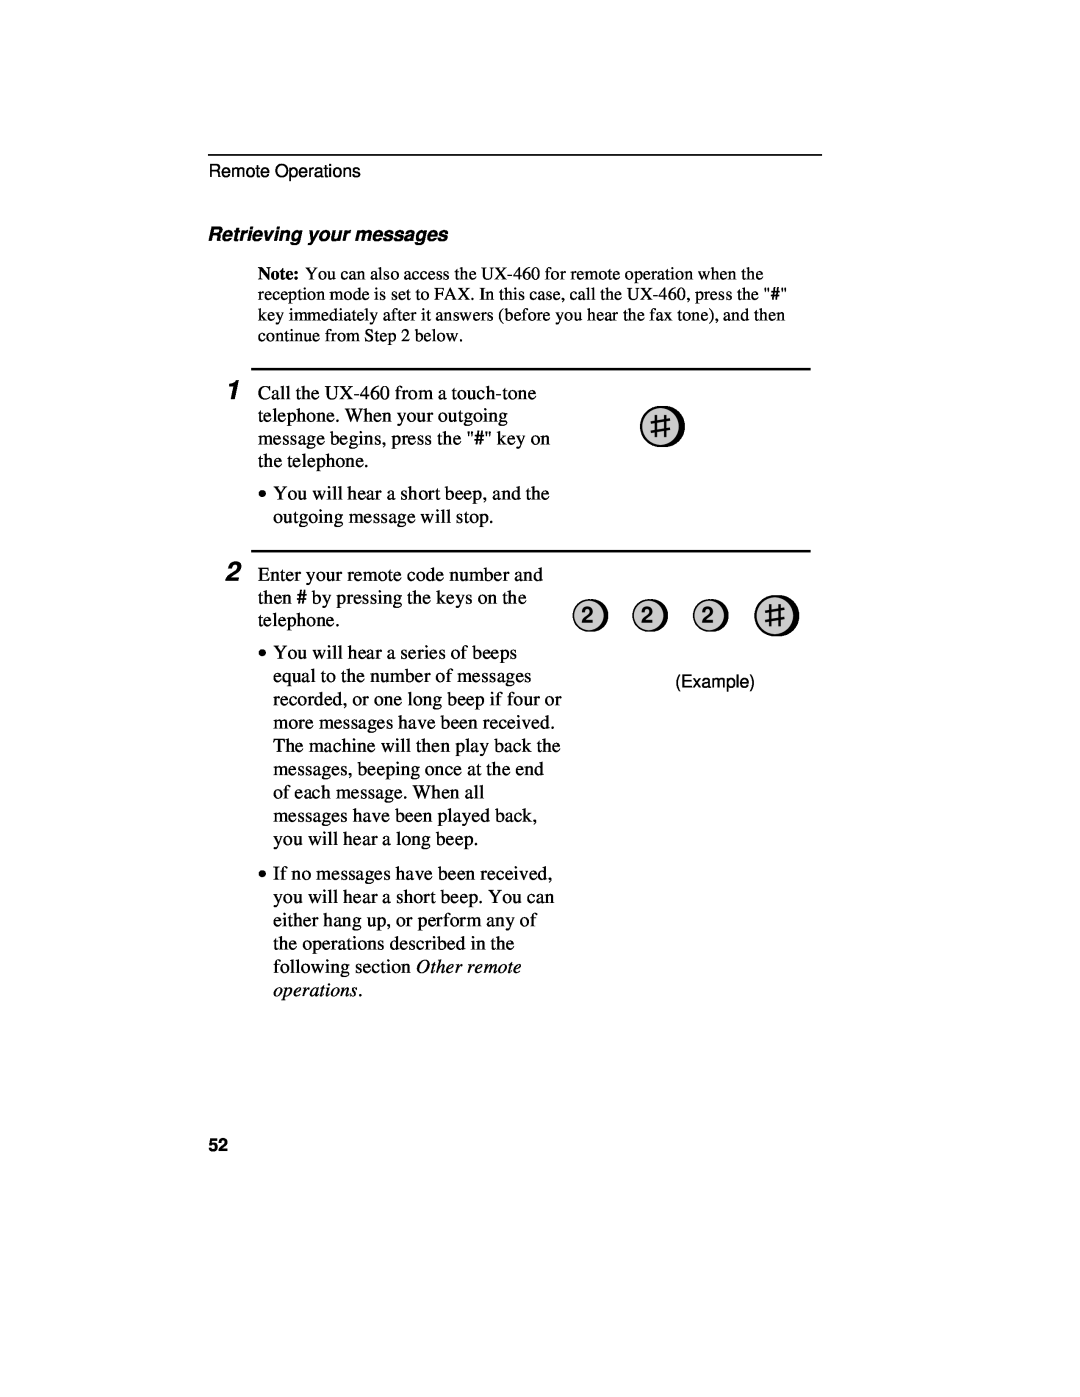 Sharp UX-460 operation manual Retrieving your messages, operations 